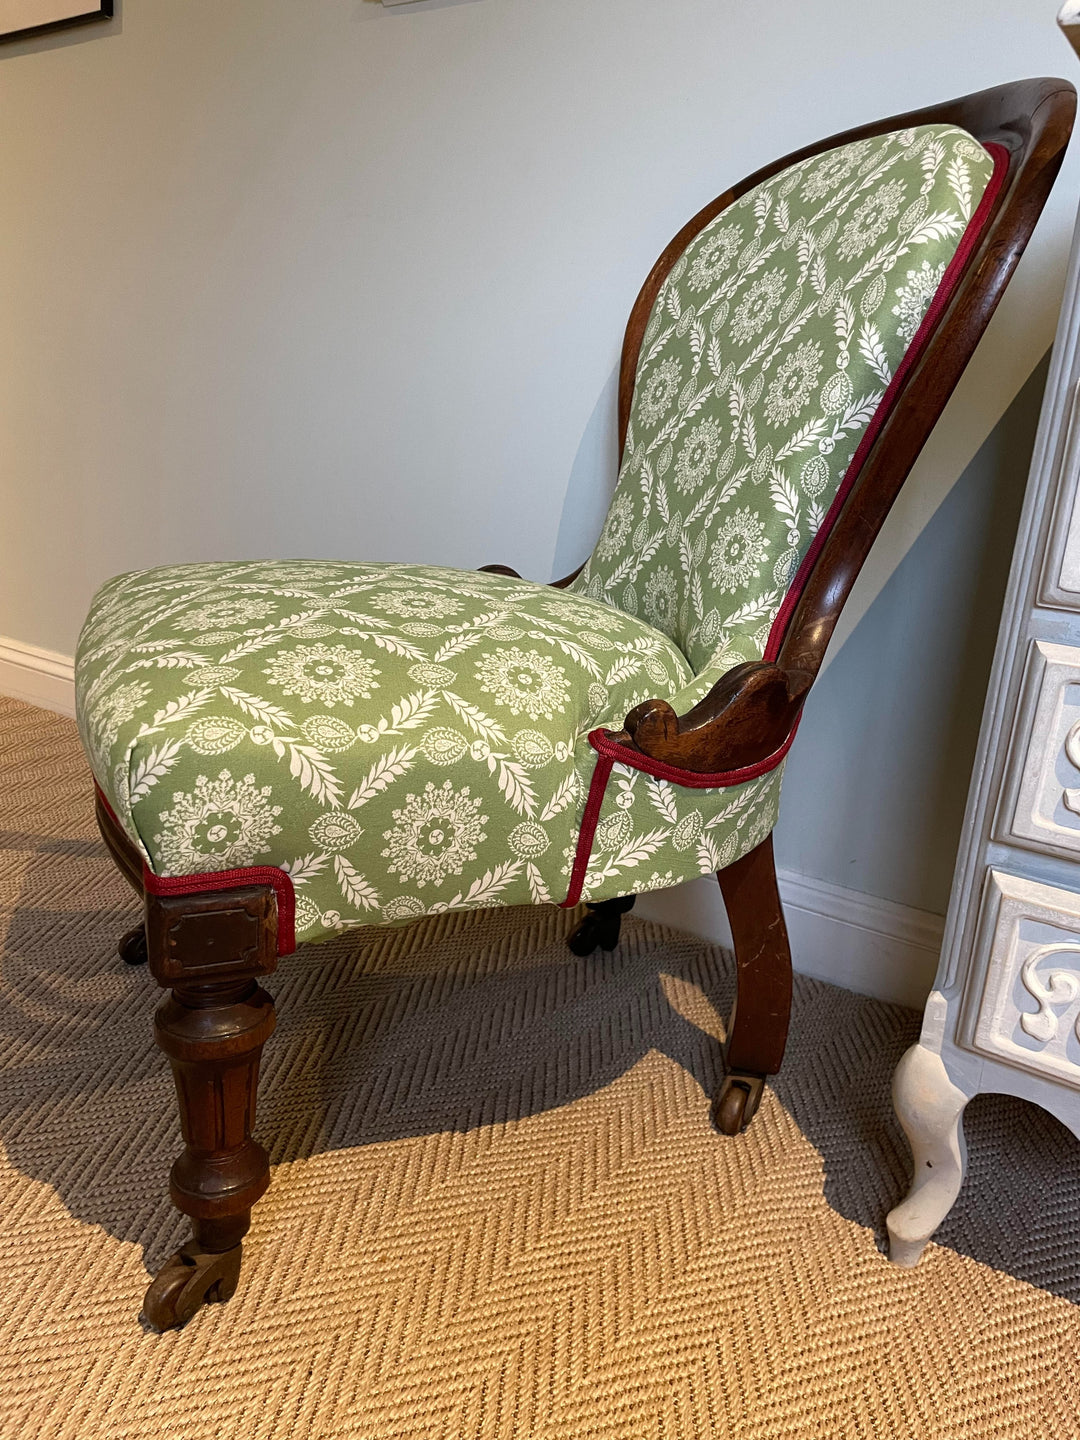 vintage-nursing-chair-reupholstred-charlotte-gainsford-textiles-rosie-green-occasional-chair-vintage-upcycled-classic-chair-furniture